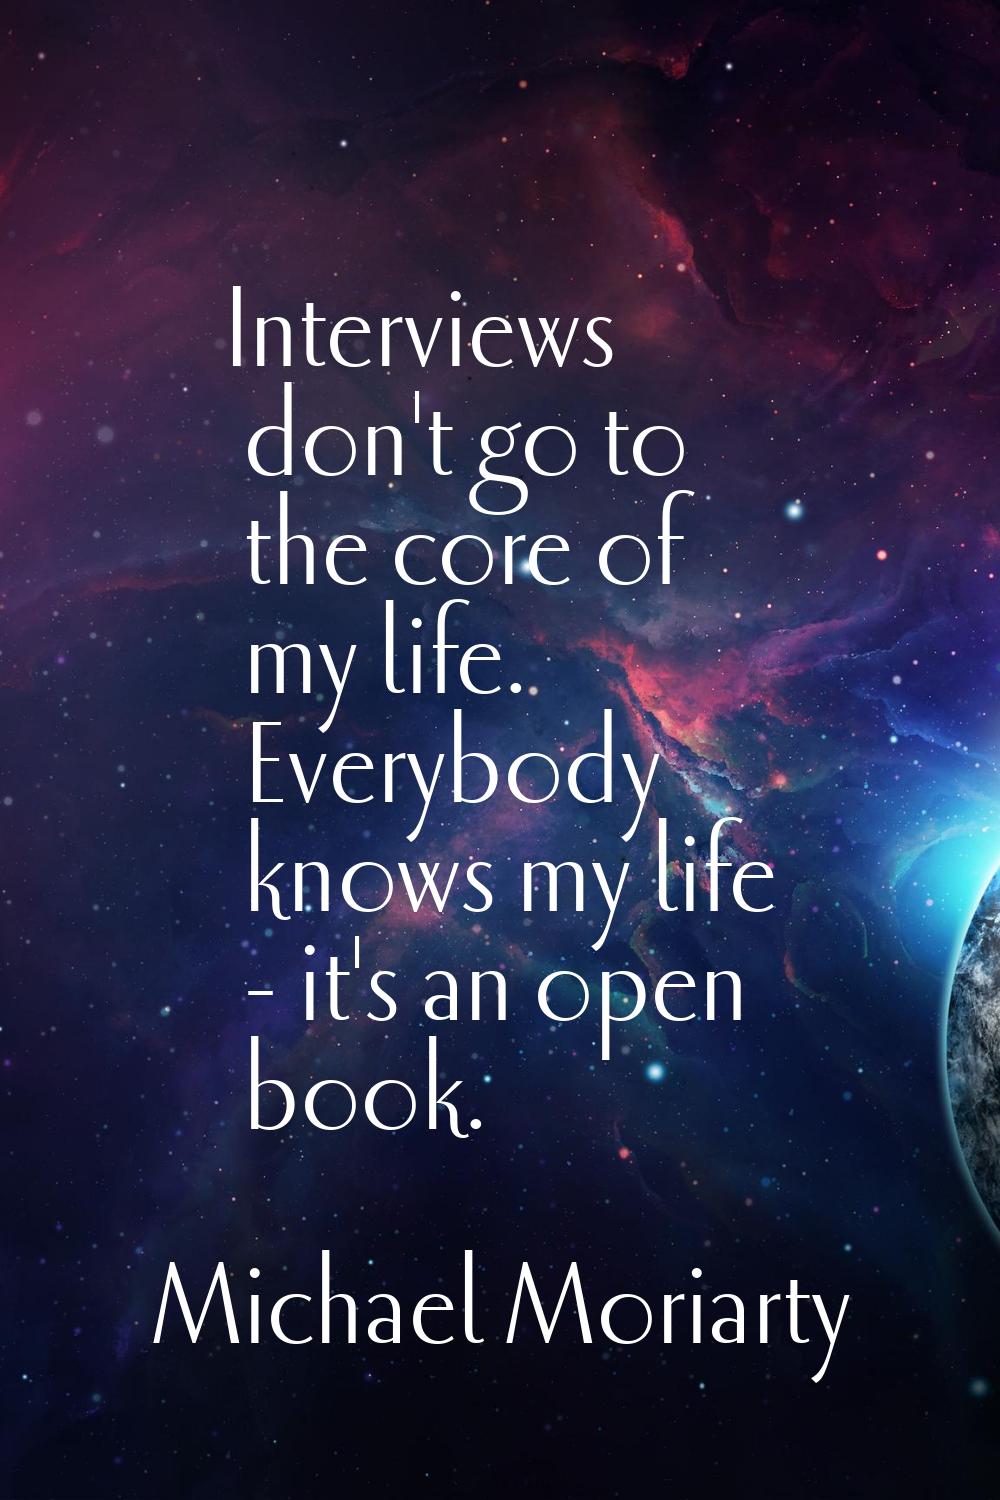 Interviews don't go to the core of my life. Everybody knows my life - it's an open book.